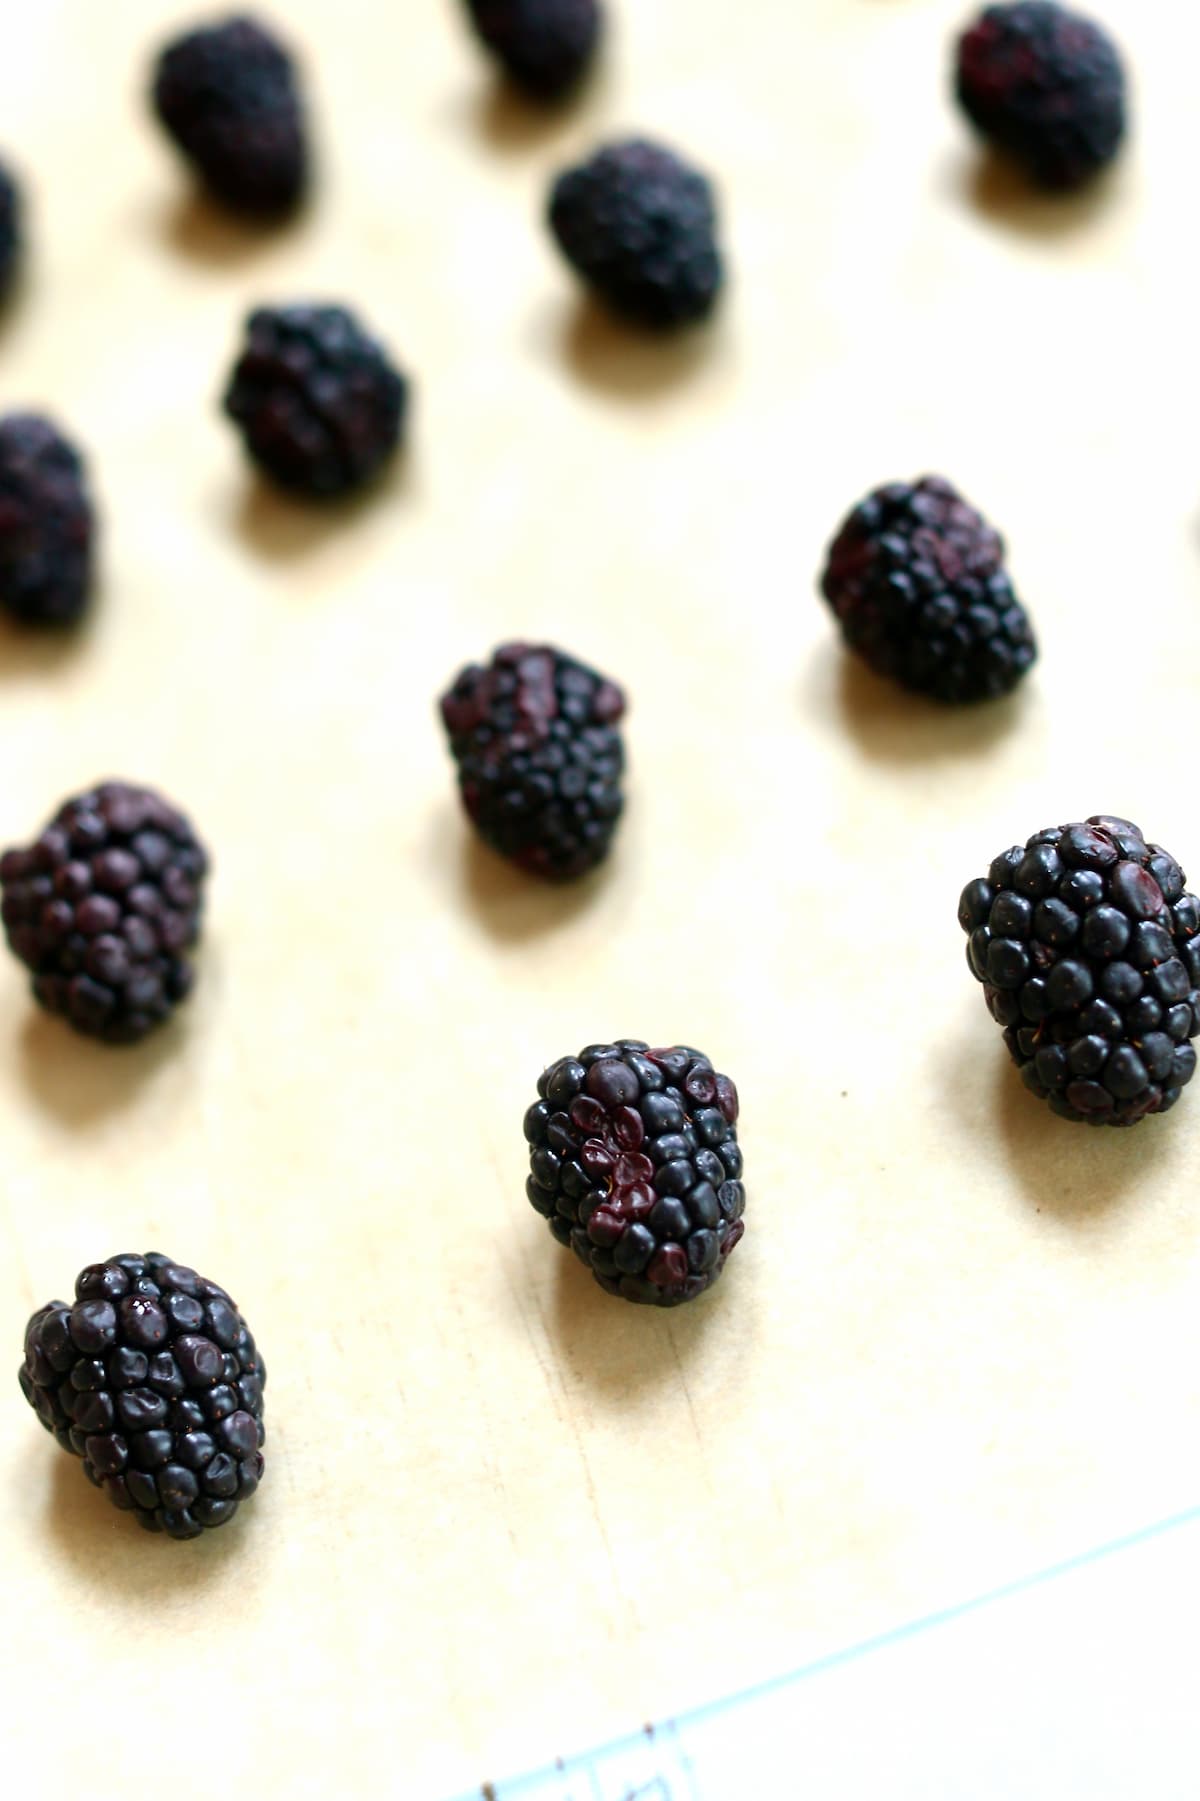 a side view of blackberries that are past their prime.